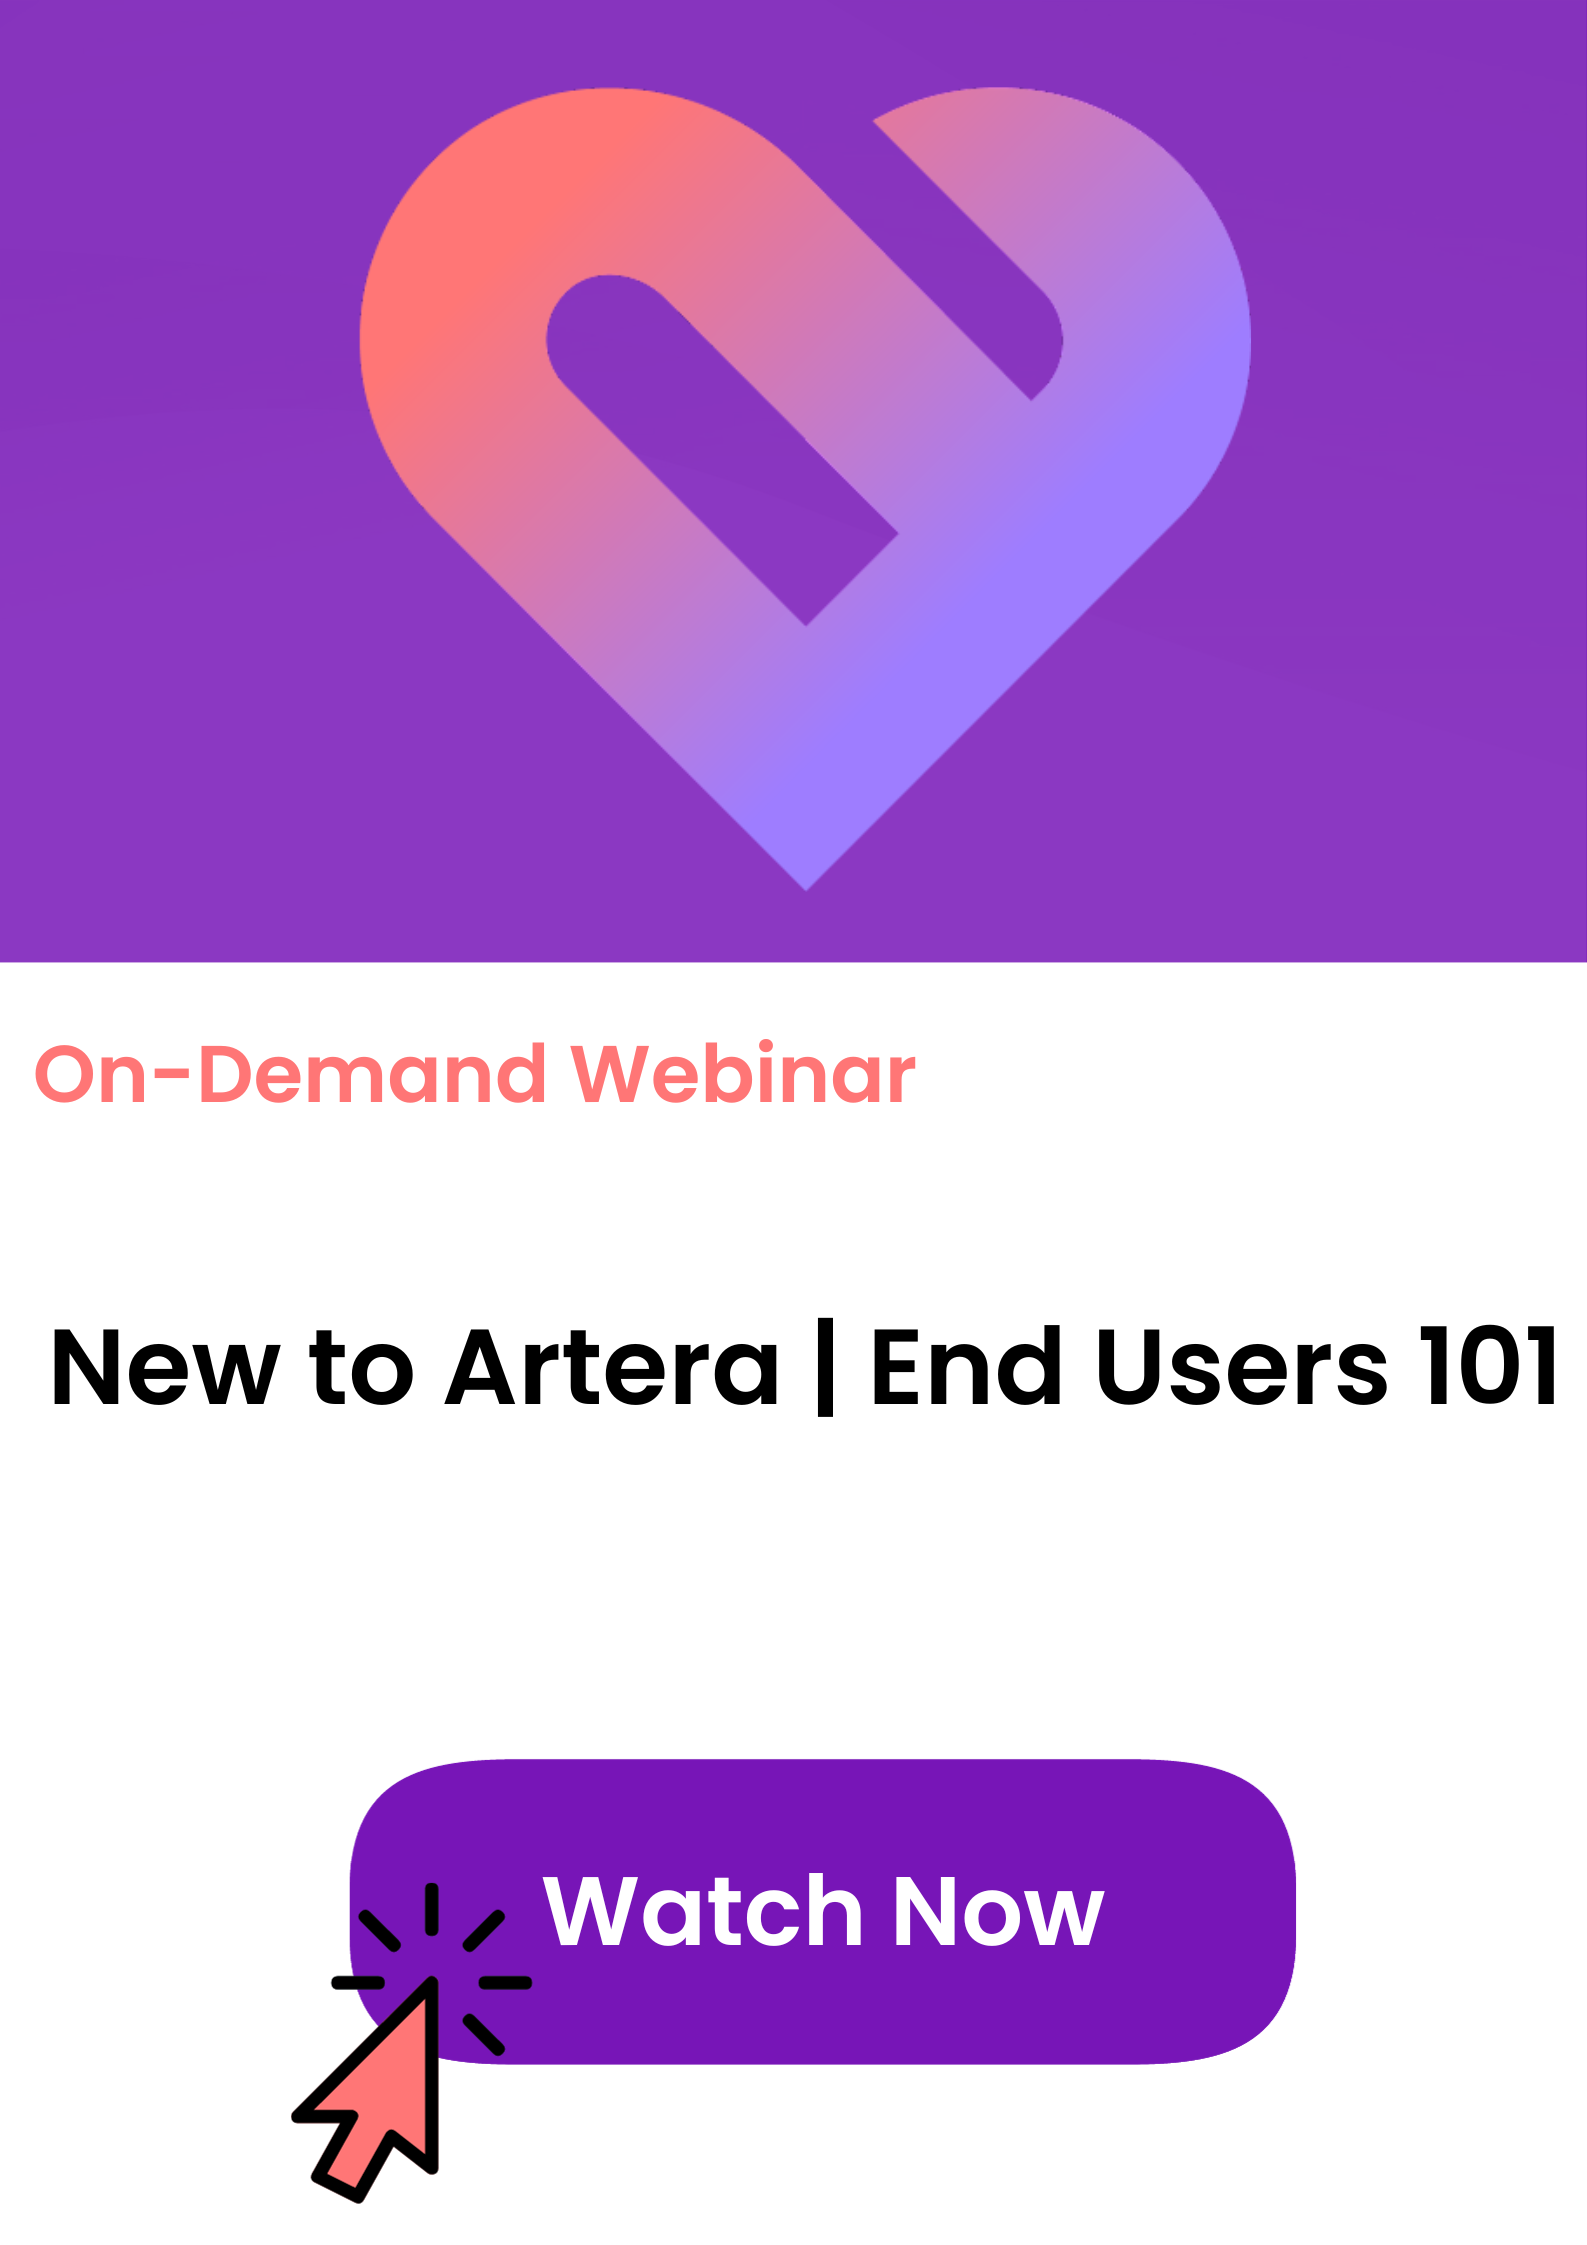 On-demand webinar tile for New to Artera End Users 101, click to watch now